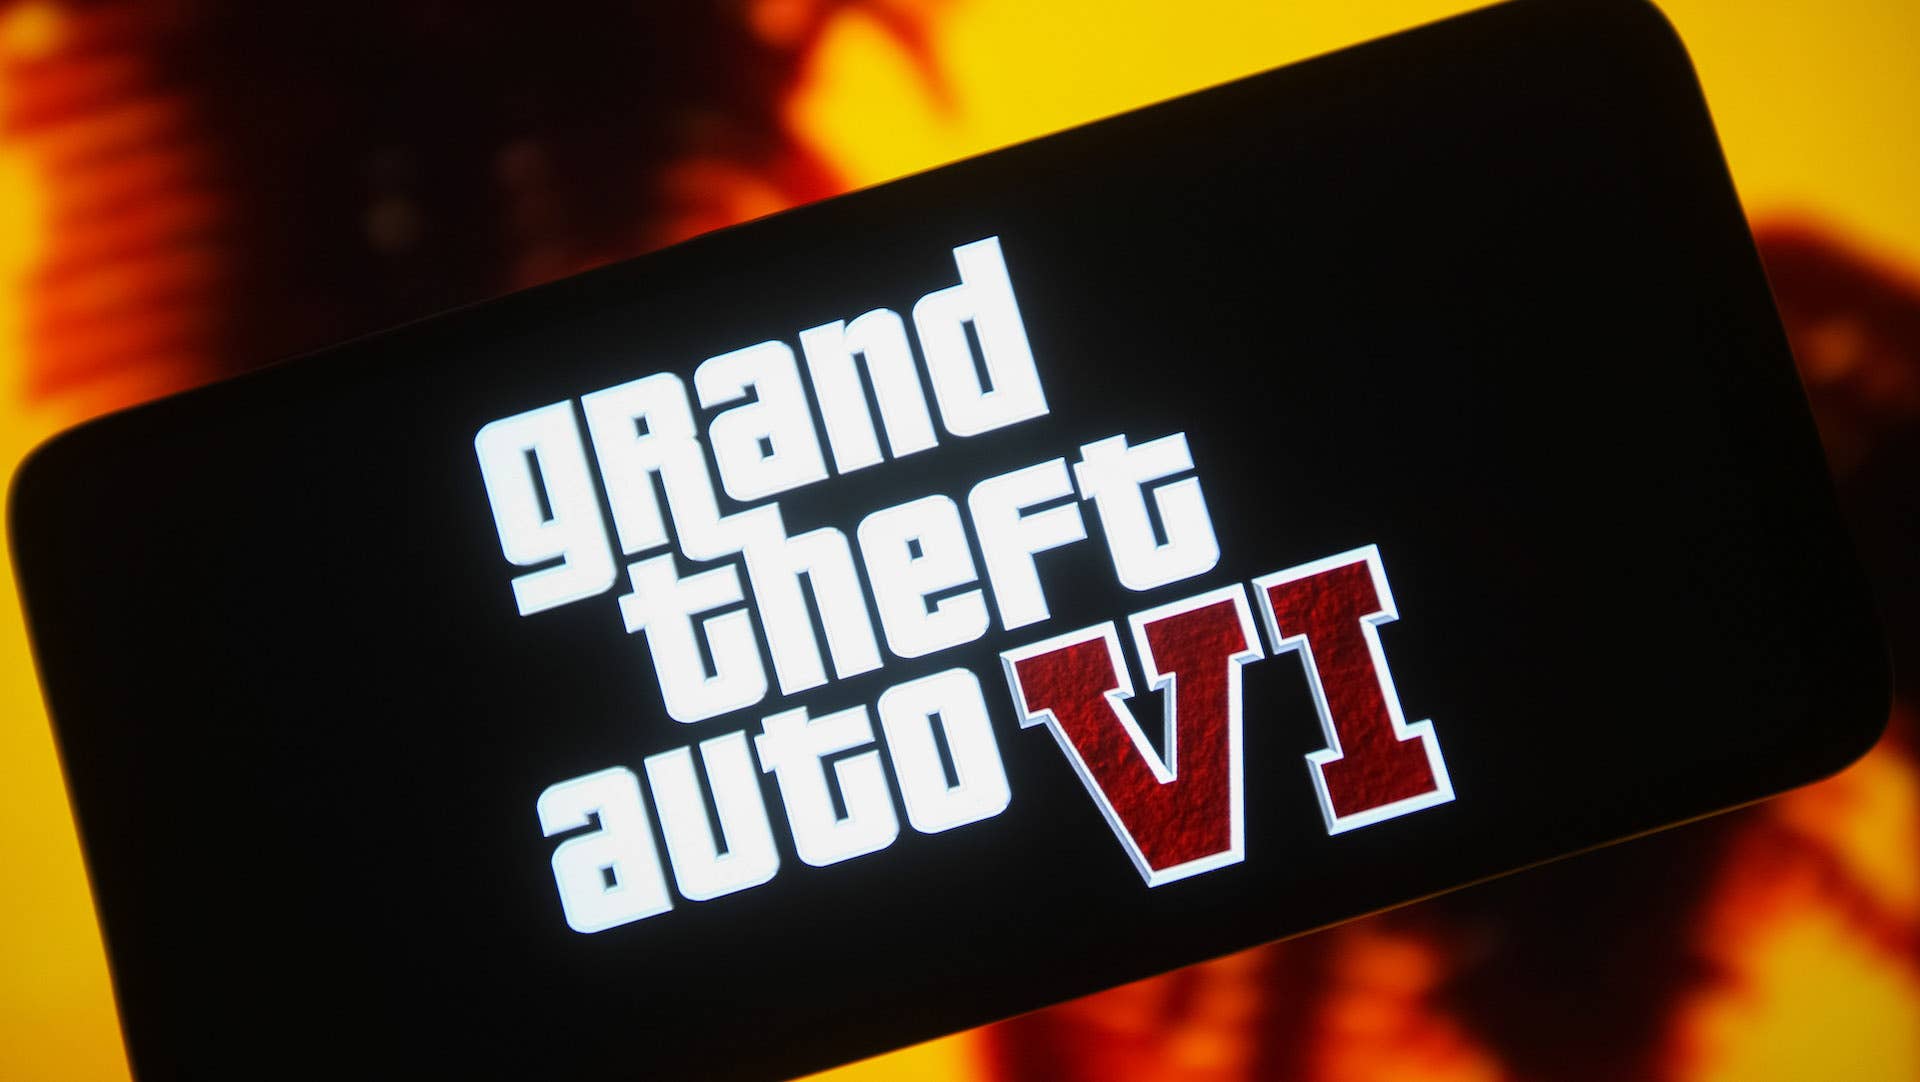 GTA 6 News: Video Game to Feature Playable Female Main Character - Bloomberg